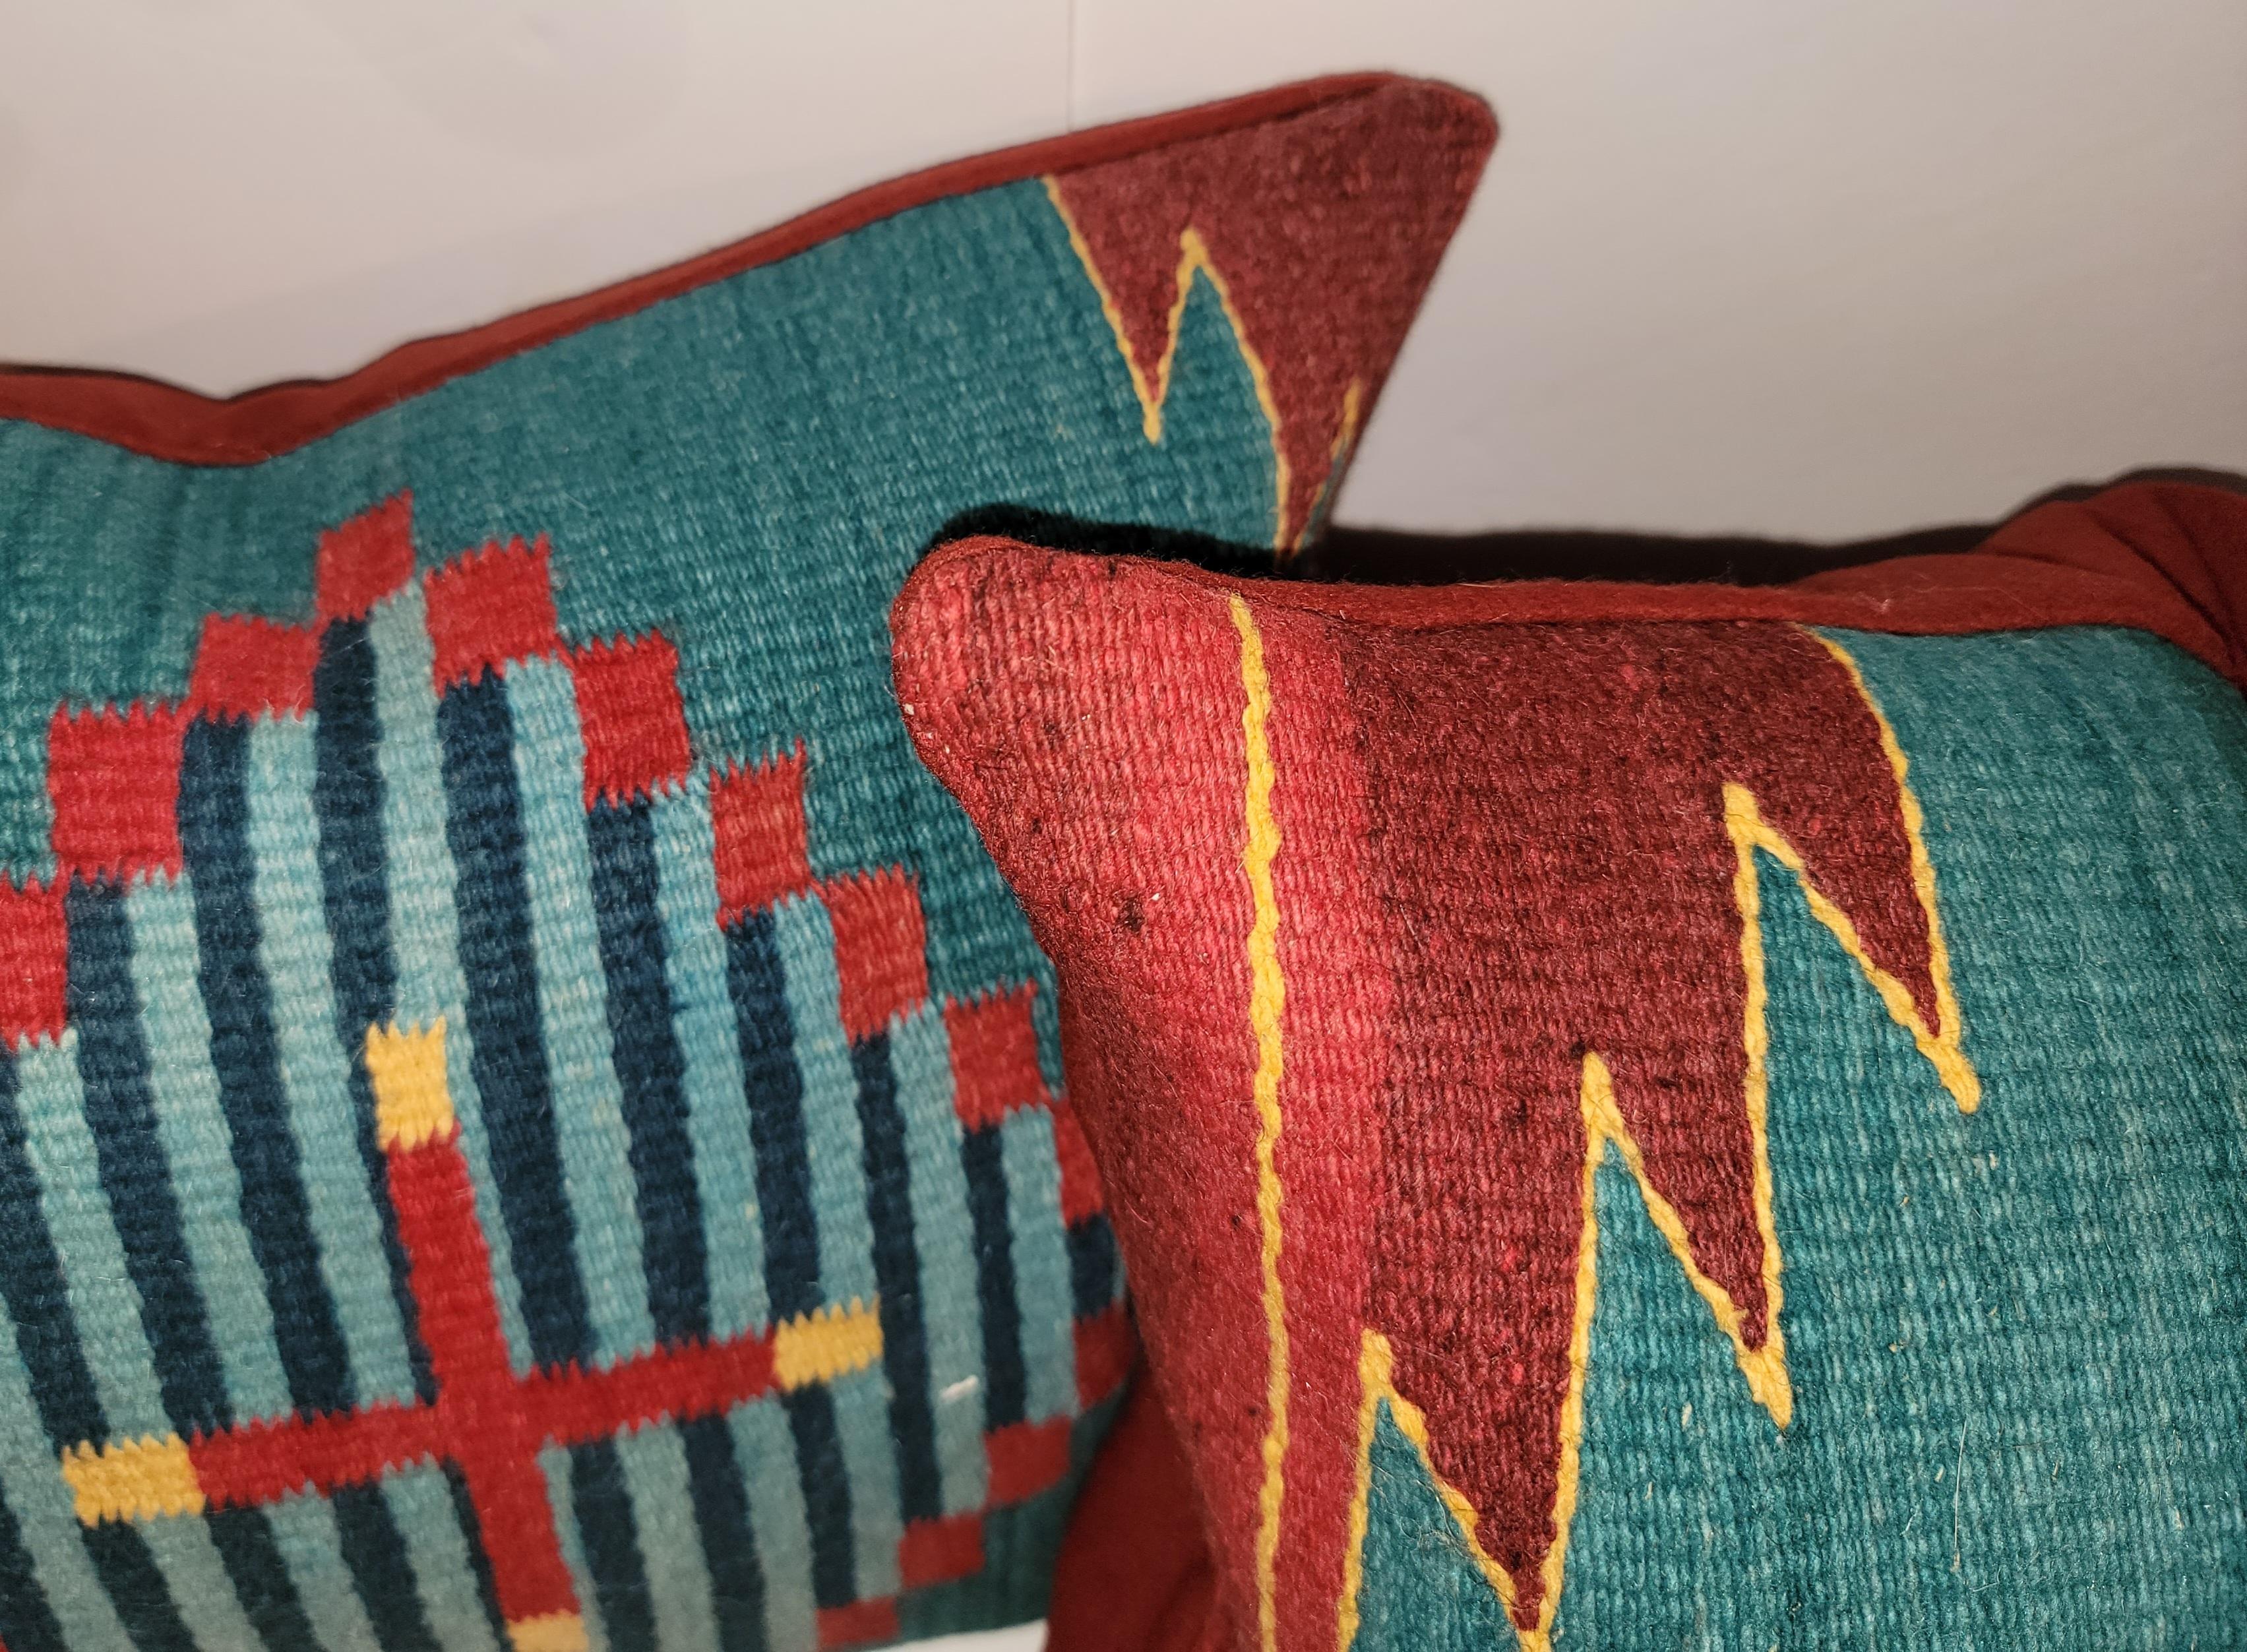 Pair of beautiful vintage Indian weaving textile custom made pillows. 
Feather and down inserts and zipped casing.